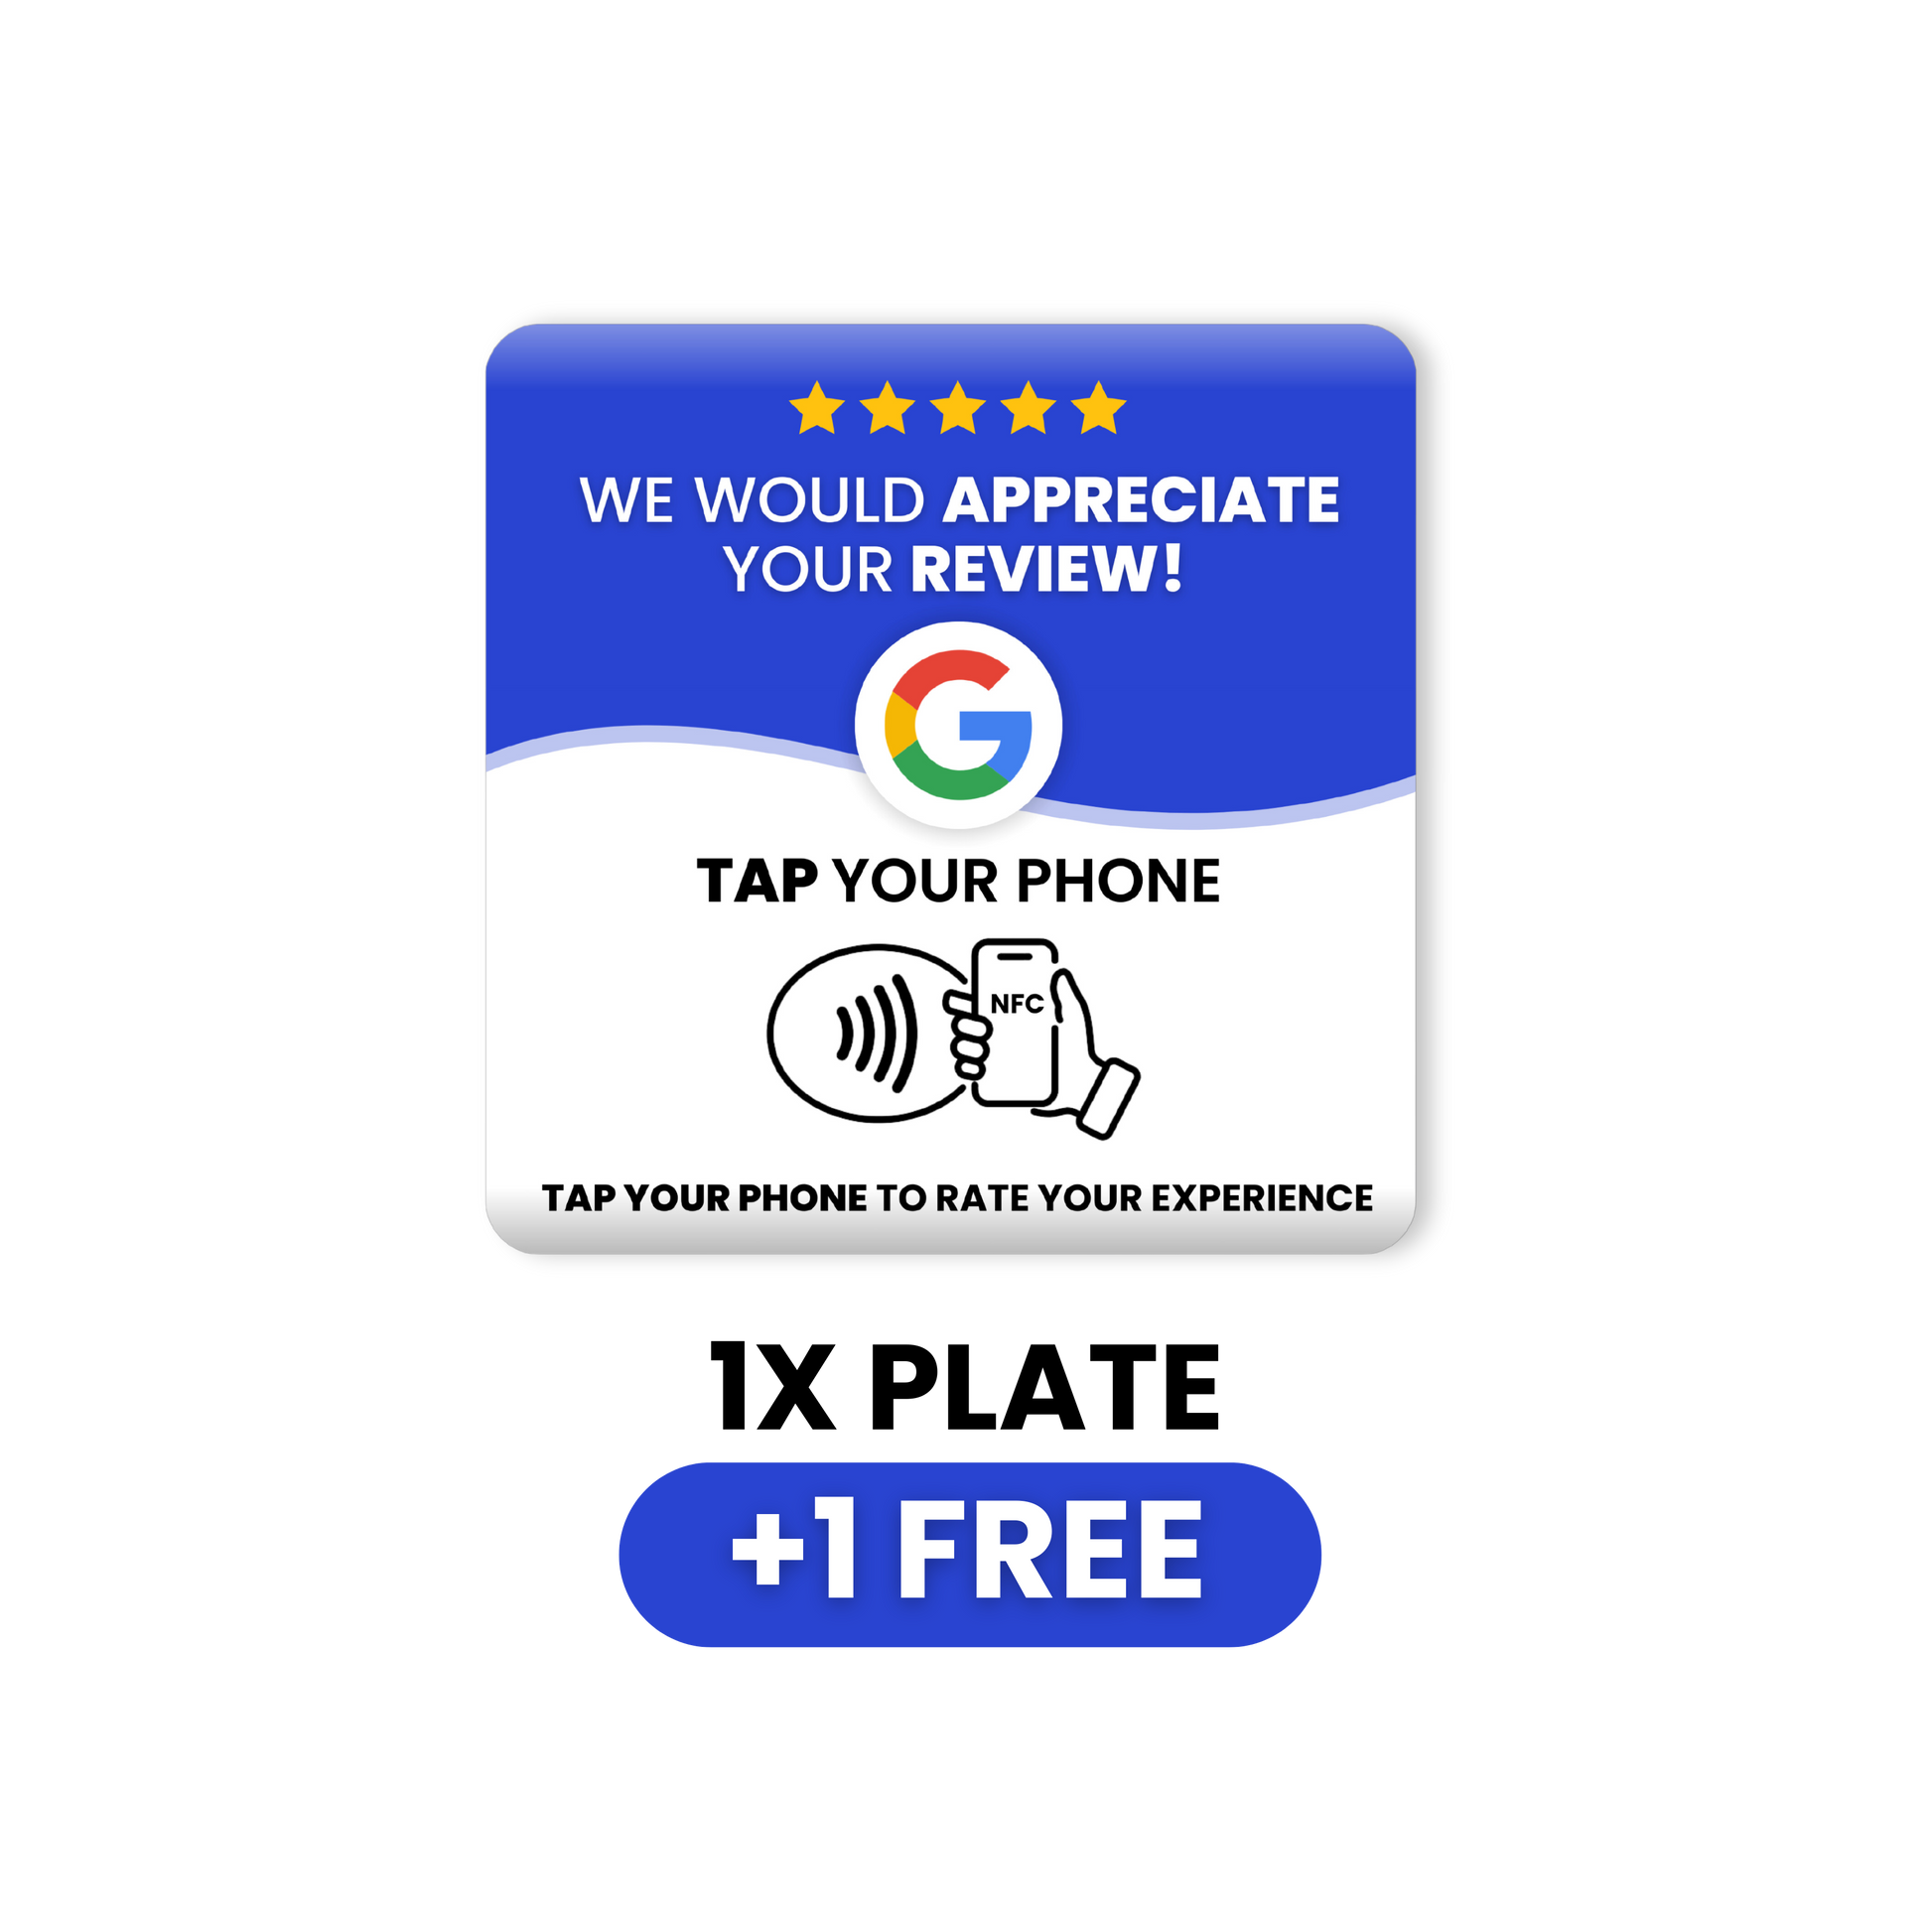 A ReviewBoost plaque designed for collecting Google reviews